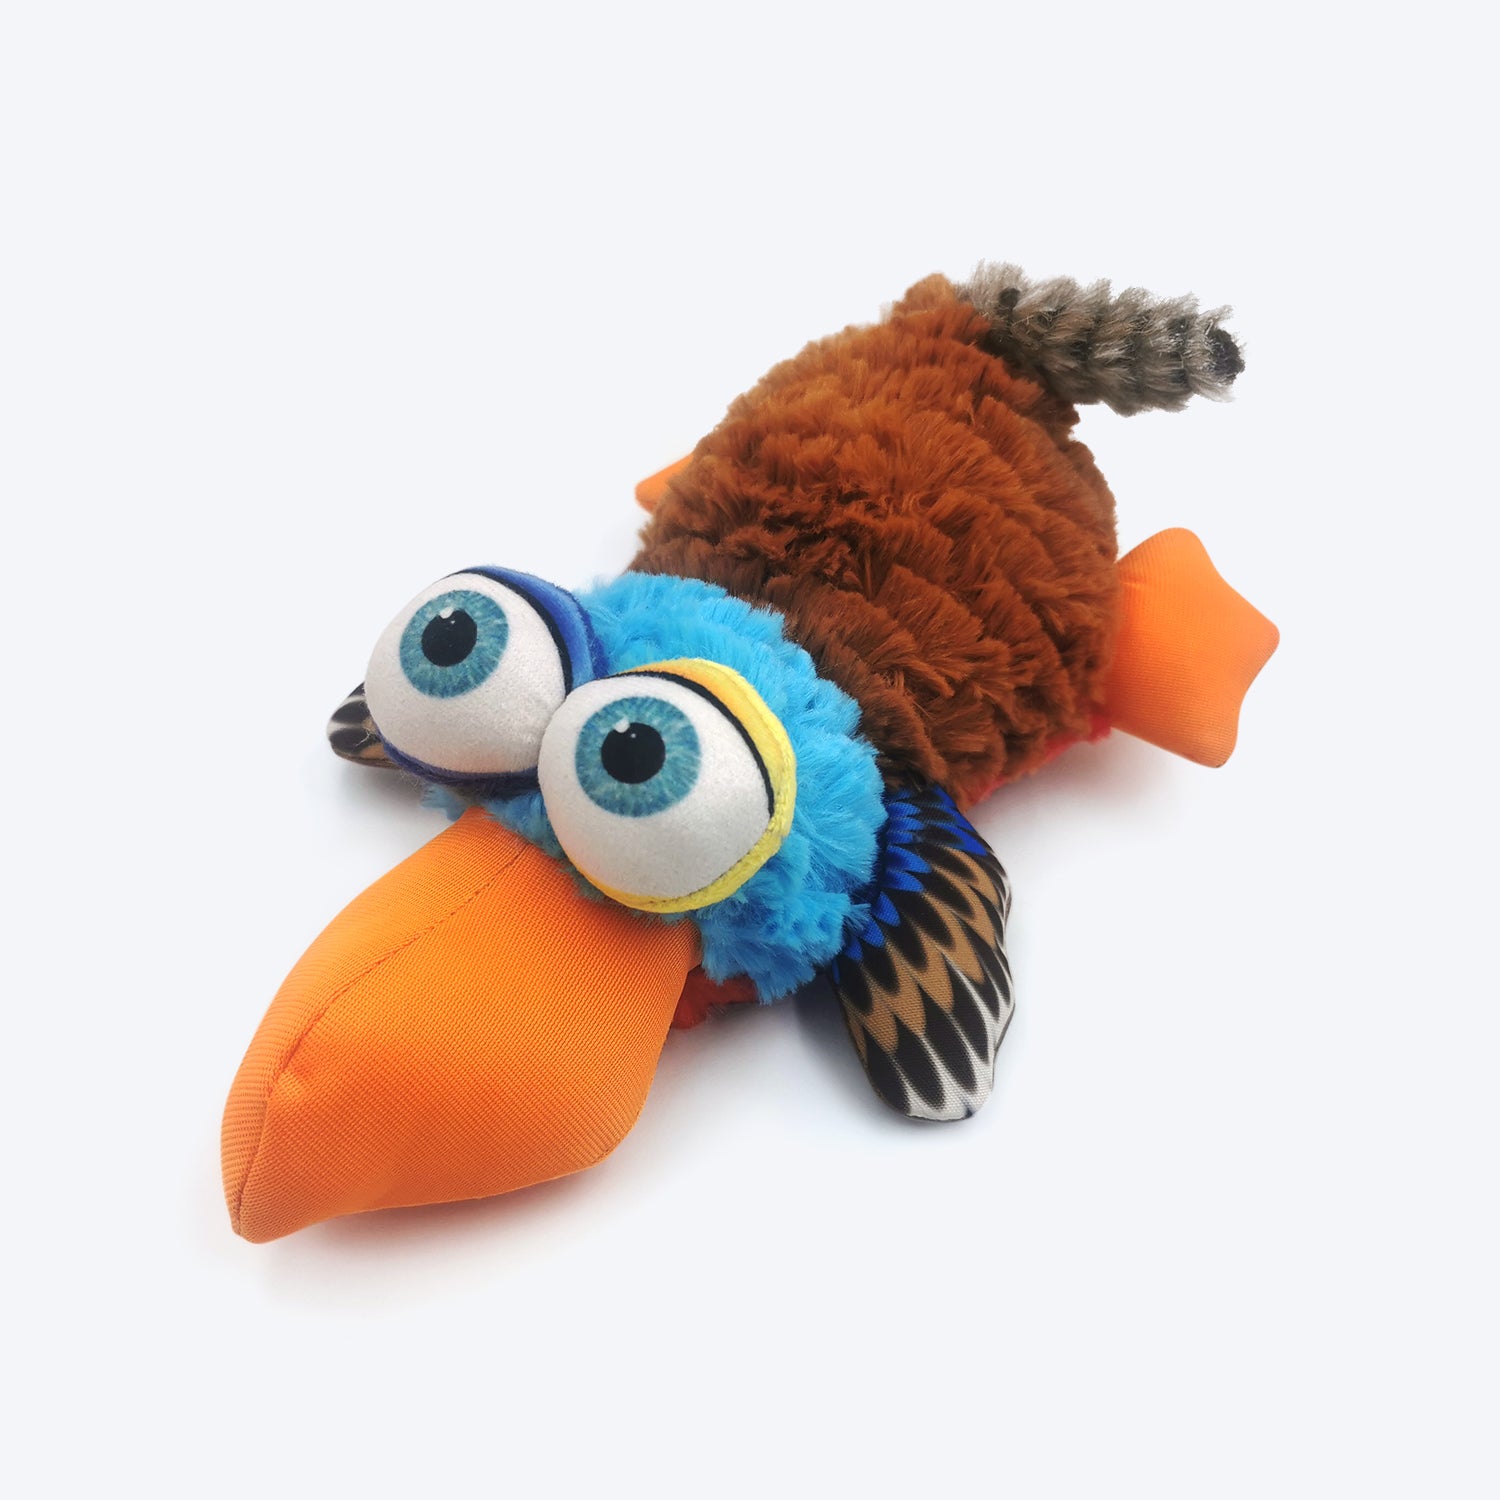 Nutrapet The Big Eyed Chicken Dog Toy - Heads Up For Tails